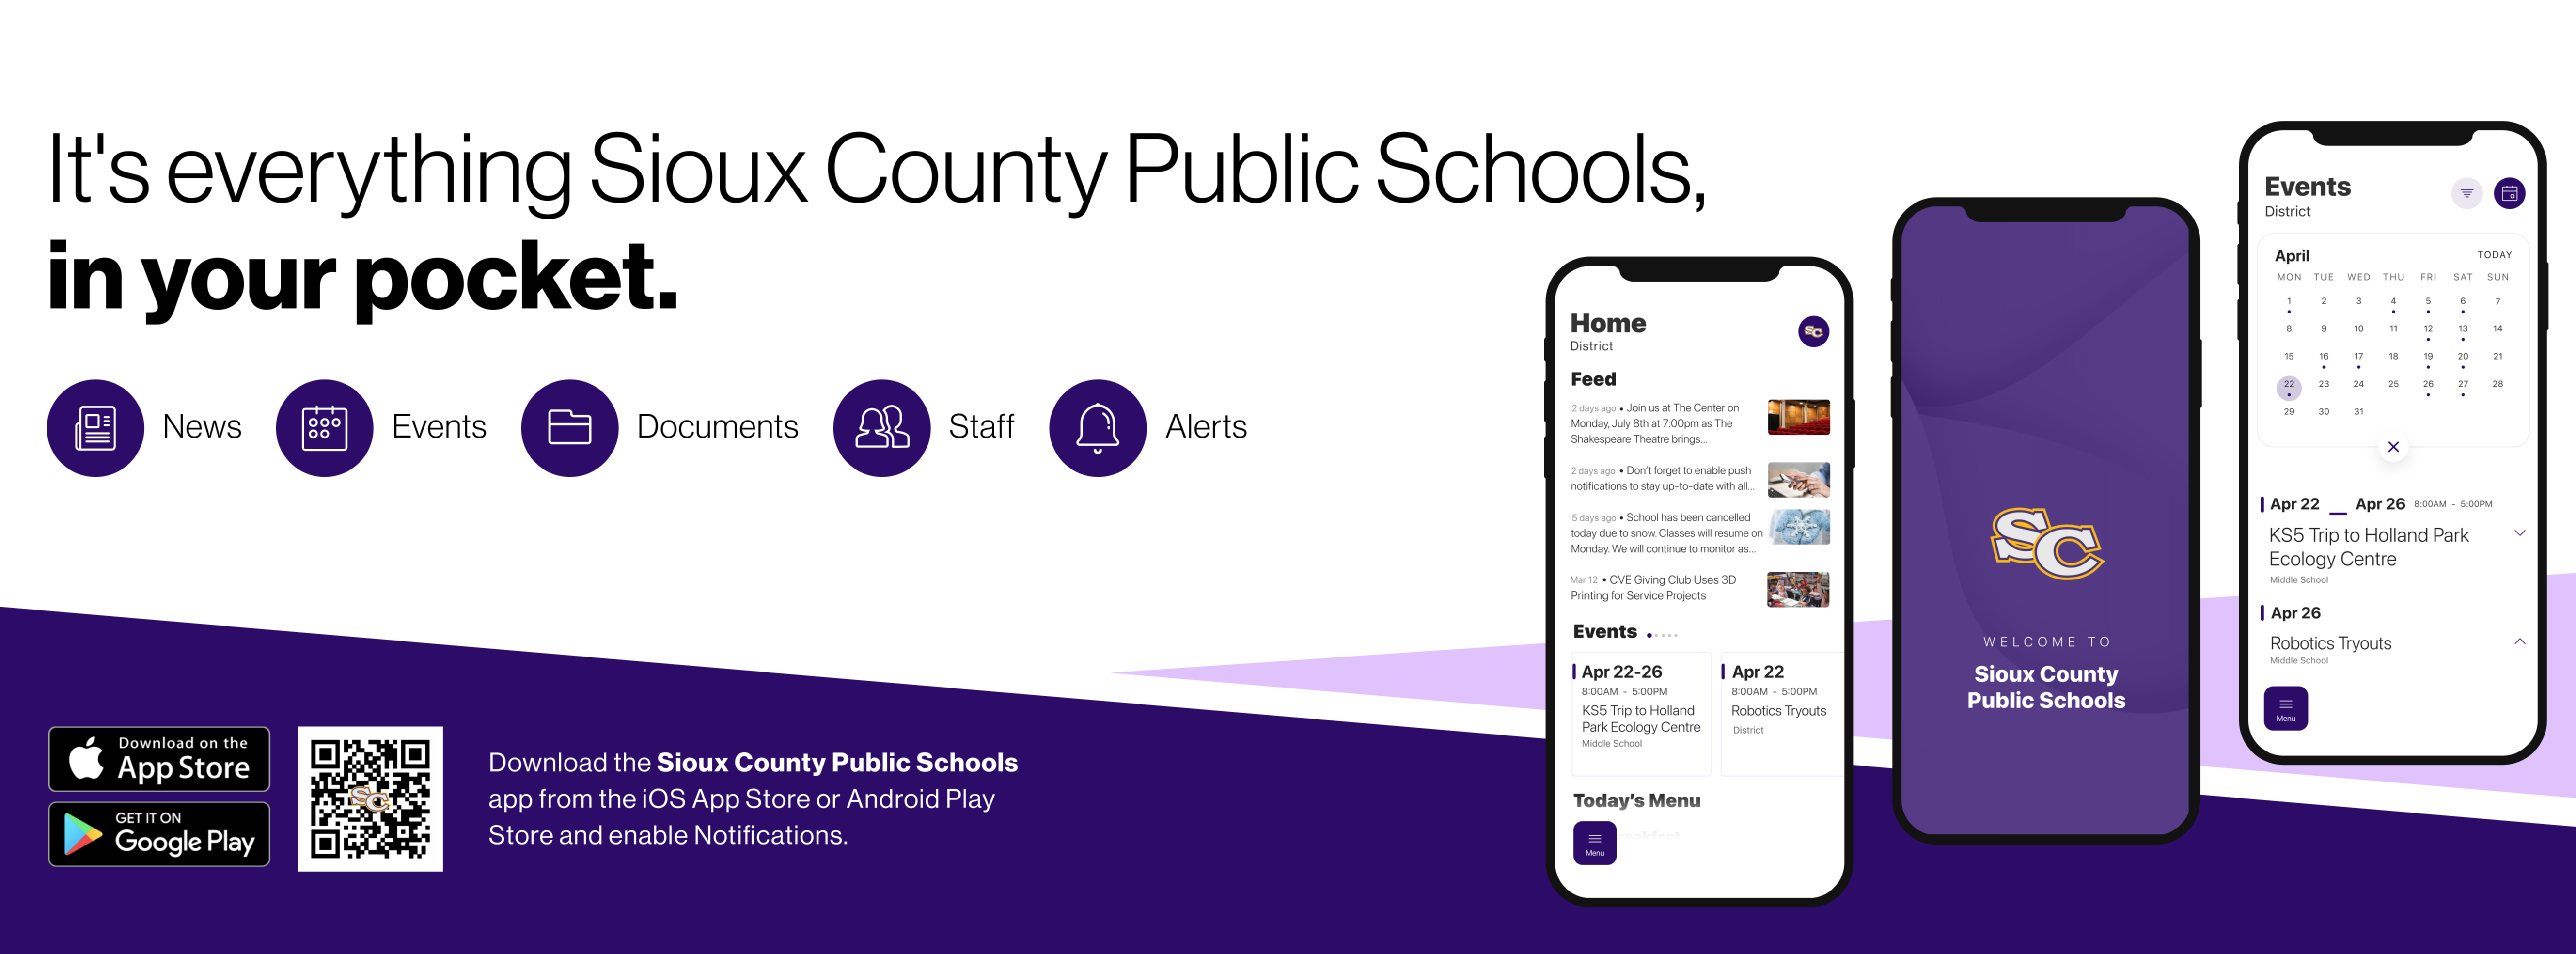 It's everything Sioux County Public Schools, in your pocket. News Events Documents Staff Alerts Download the Sioux County Public Schools app from the iOS App Store or Android Play Store and enable Notifications